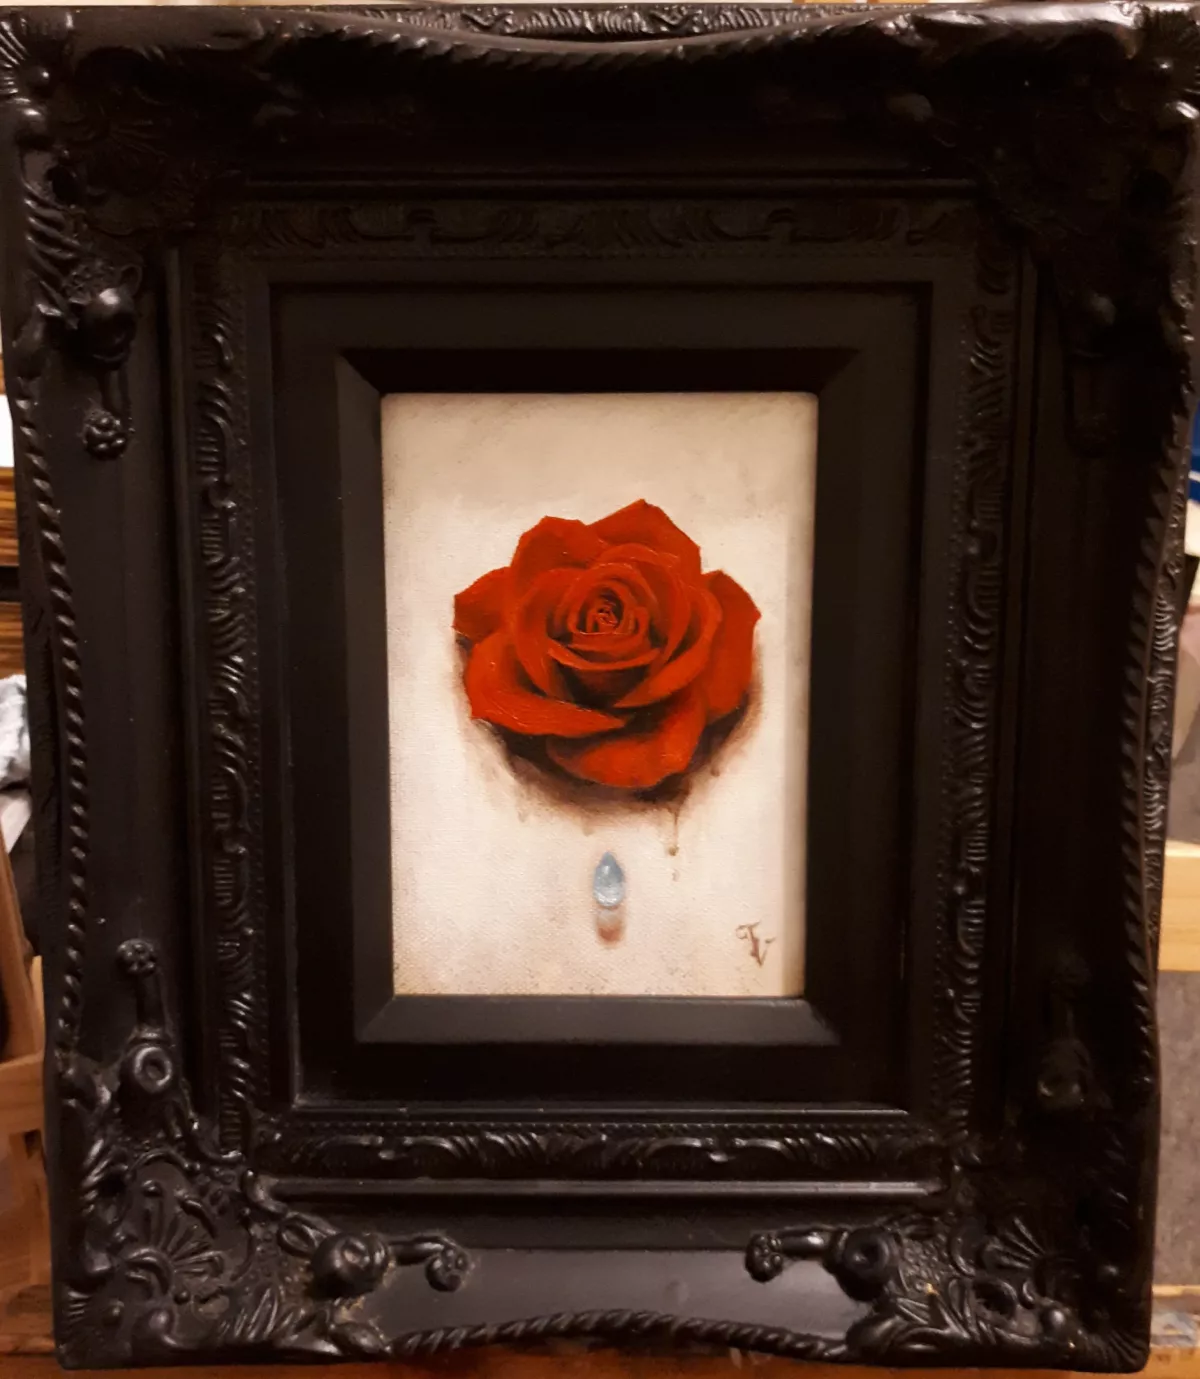 Painting of contemporary artist Vartan Ghazarian - Rose study. For sale.